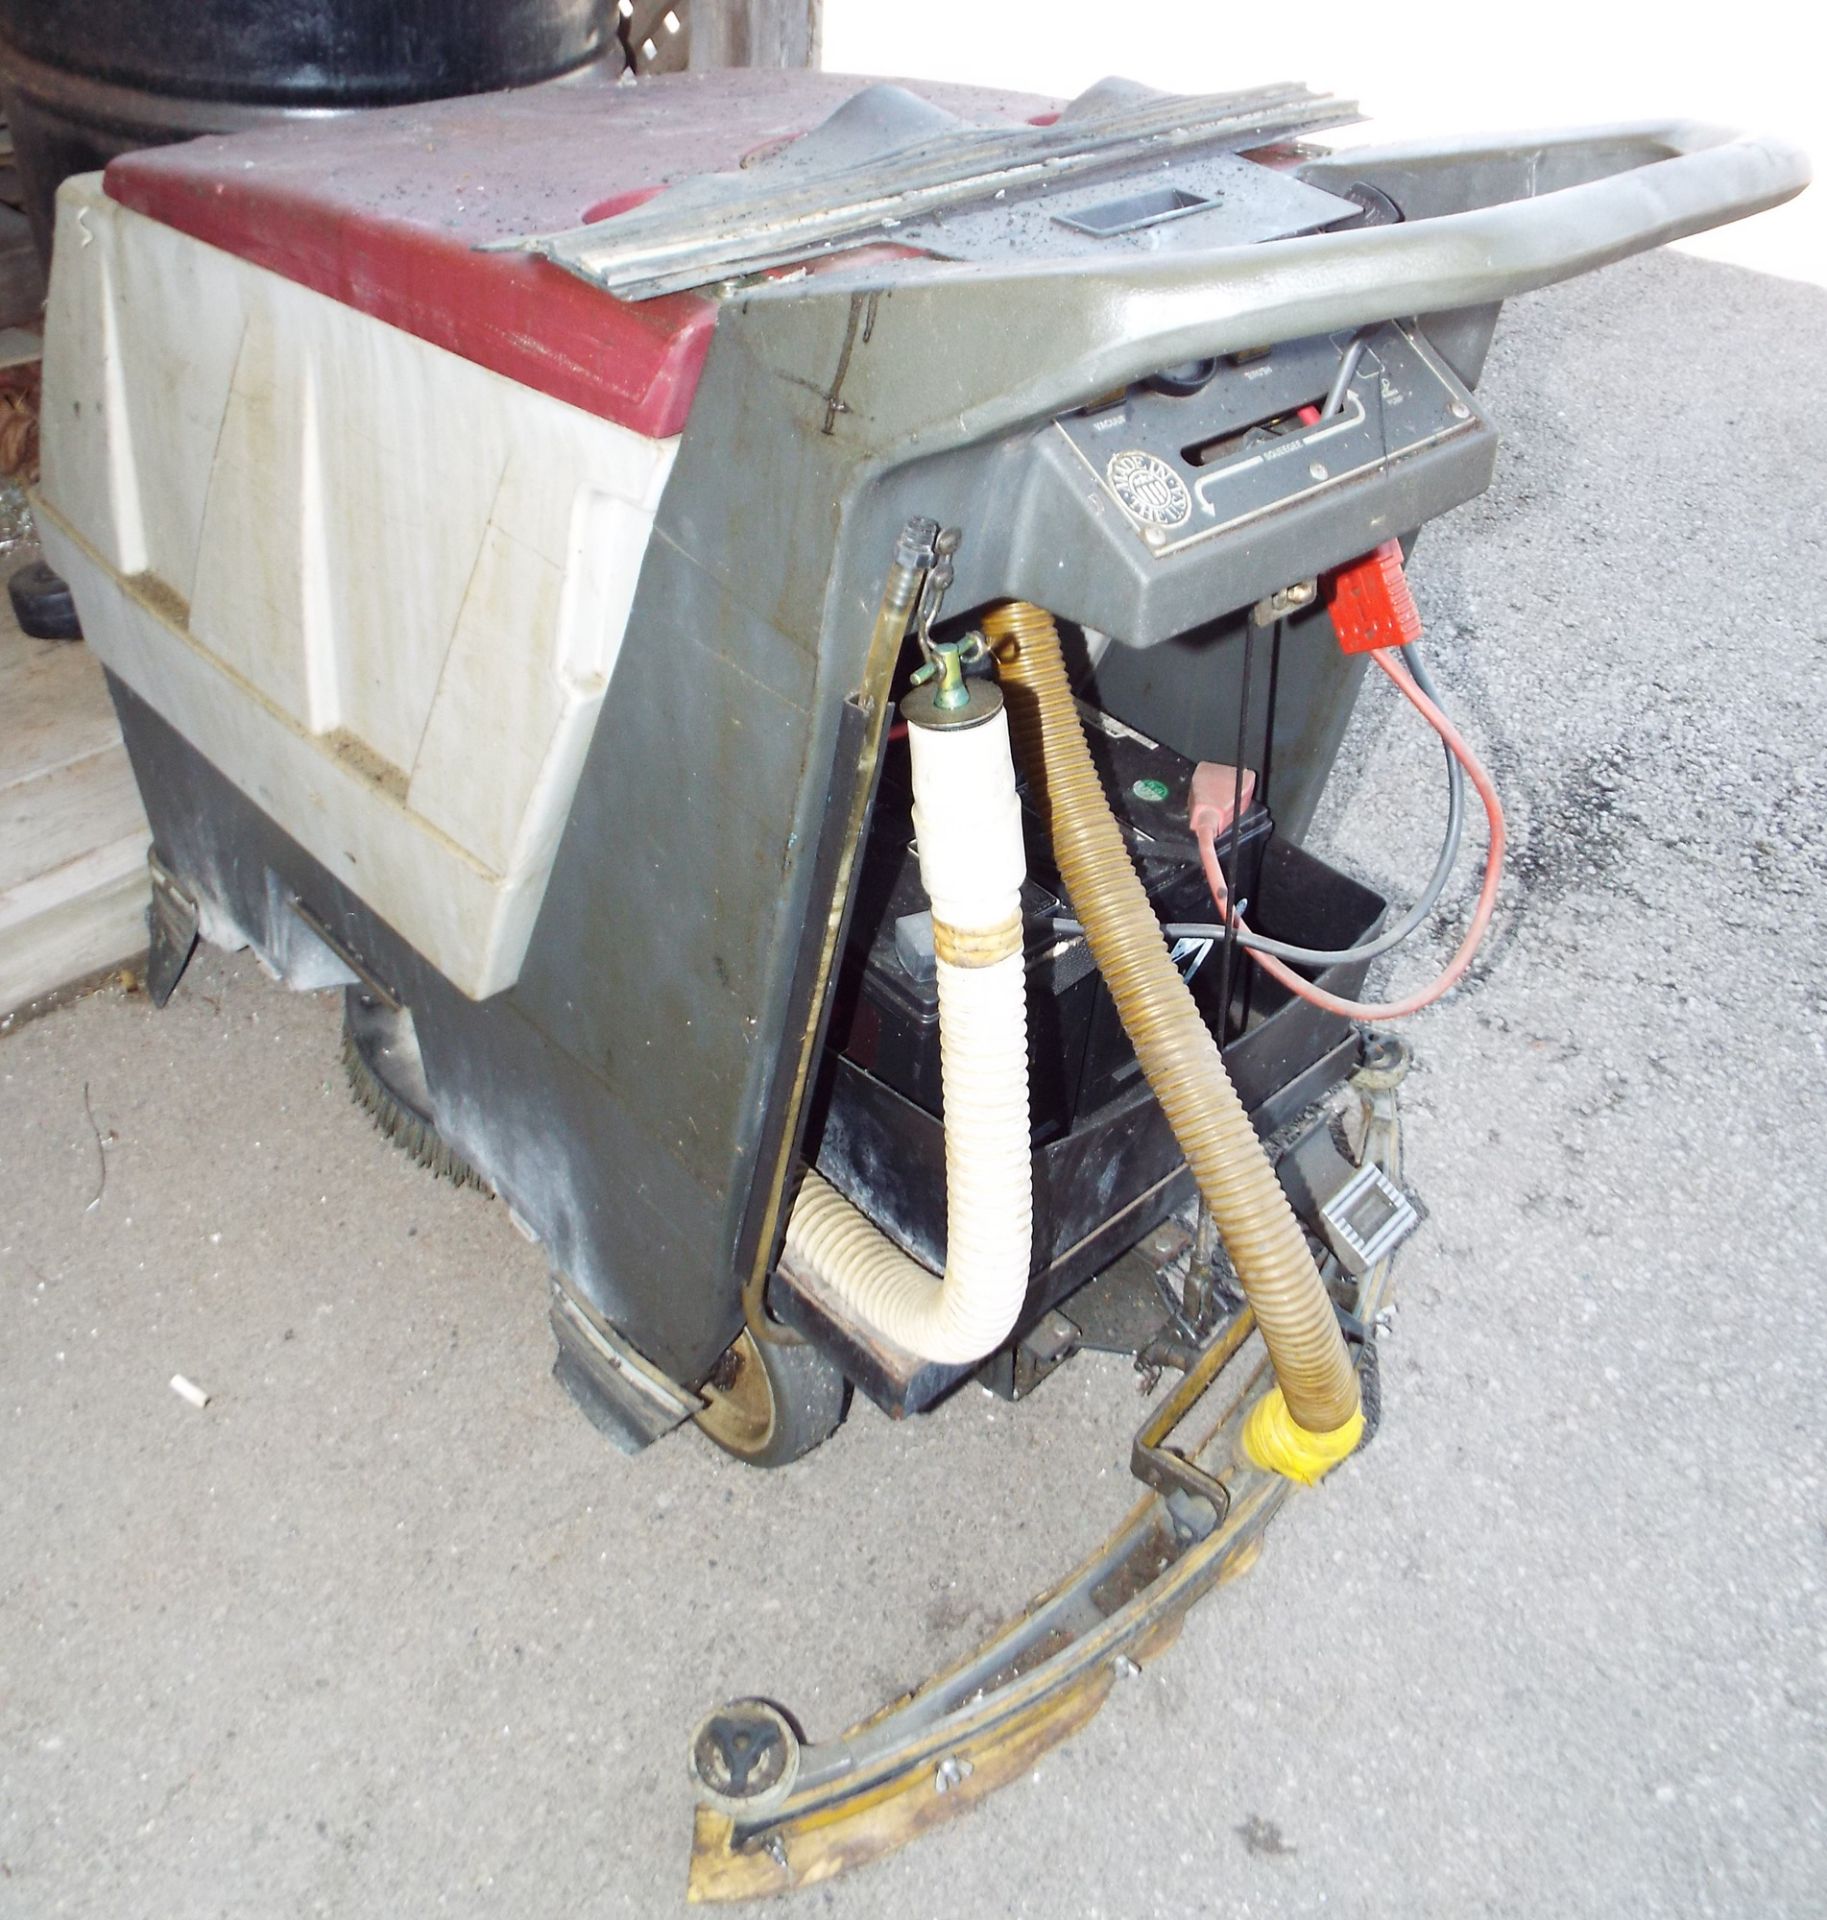 LOT/ MINUTEMAN E17 & 200 FLOOR SCRUBBERS WITH CHARGER & ACCESSORIES (NOT IN SERVICE) - Image 4 of 6